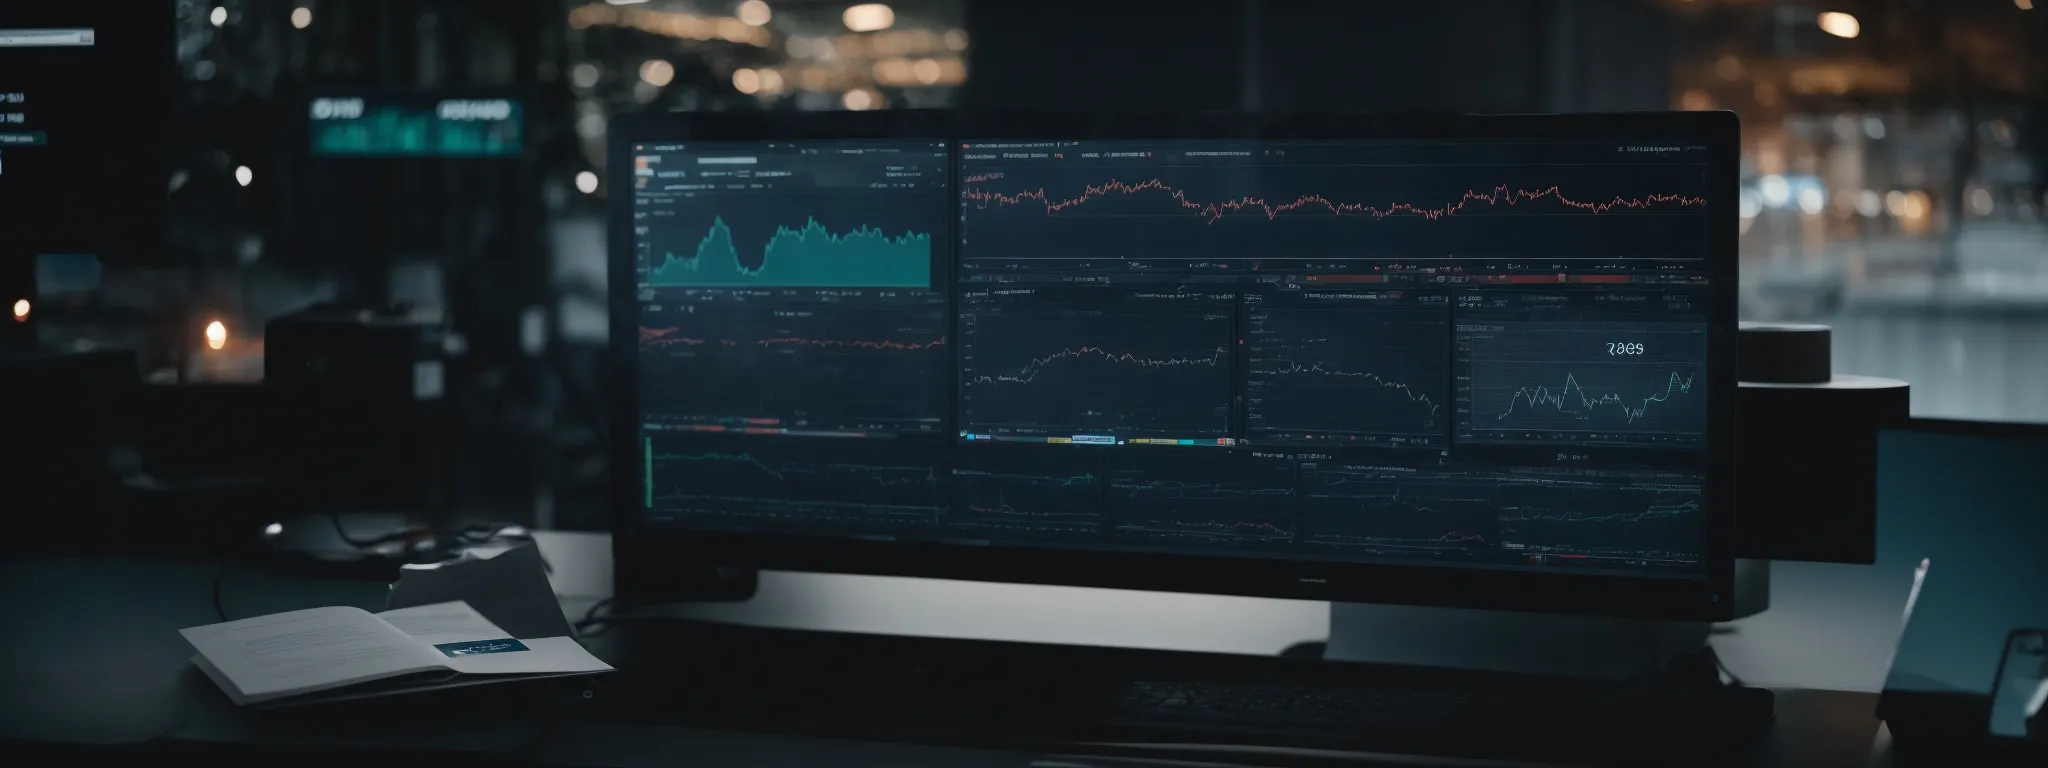 a computer screen displays a complex seo analytics dashboard while ai algorithms process data in the background.